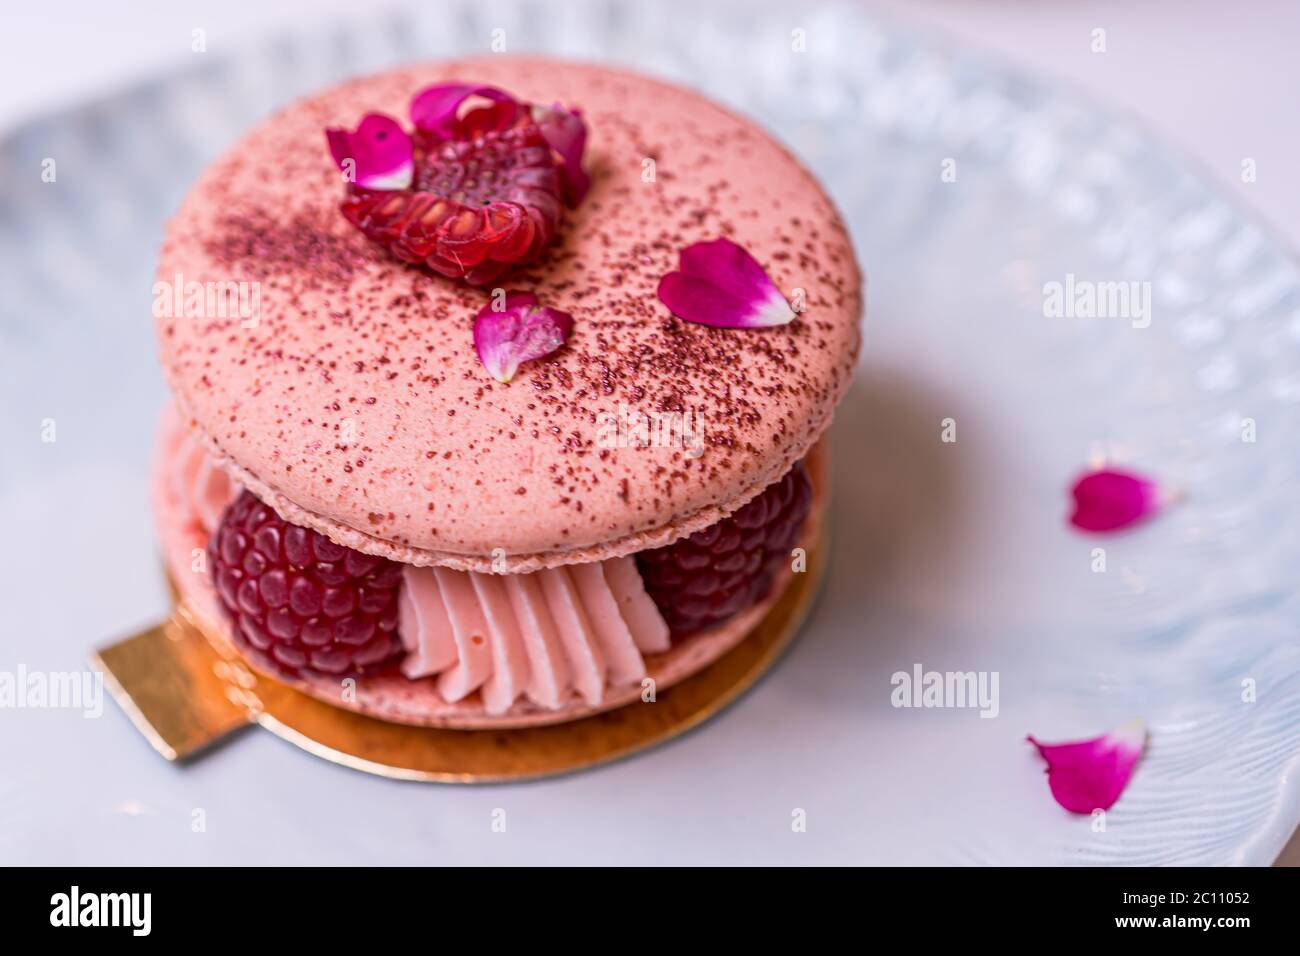 Beautiful Pink Raspberry Macaron cookies on blue plate. Healthy food. Blue table background. Top view.  Stock Photo